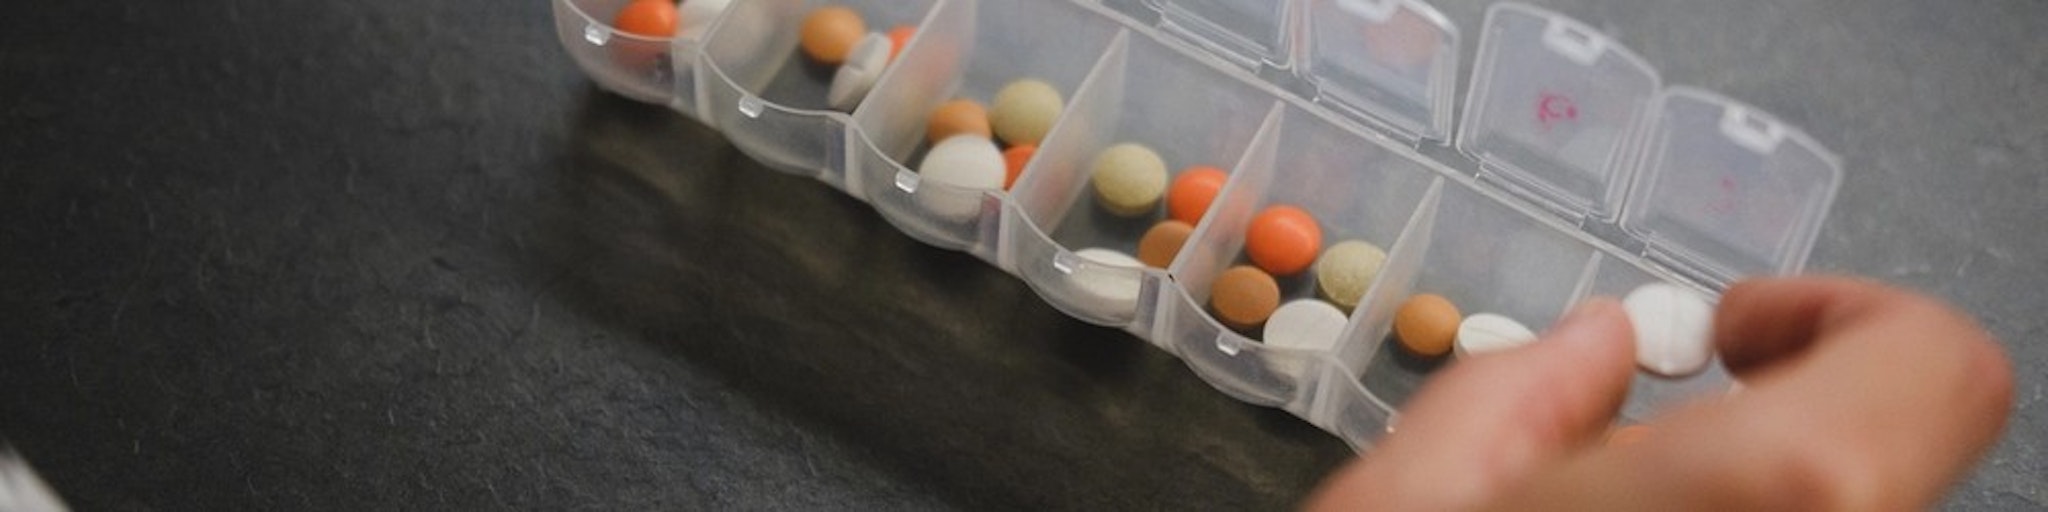 Cover Image for Avoid These Common Drugs Or Risk An Oklahoma DUI